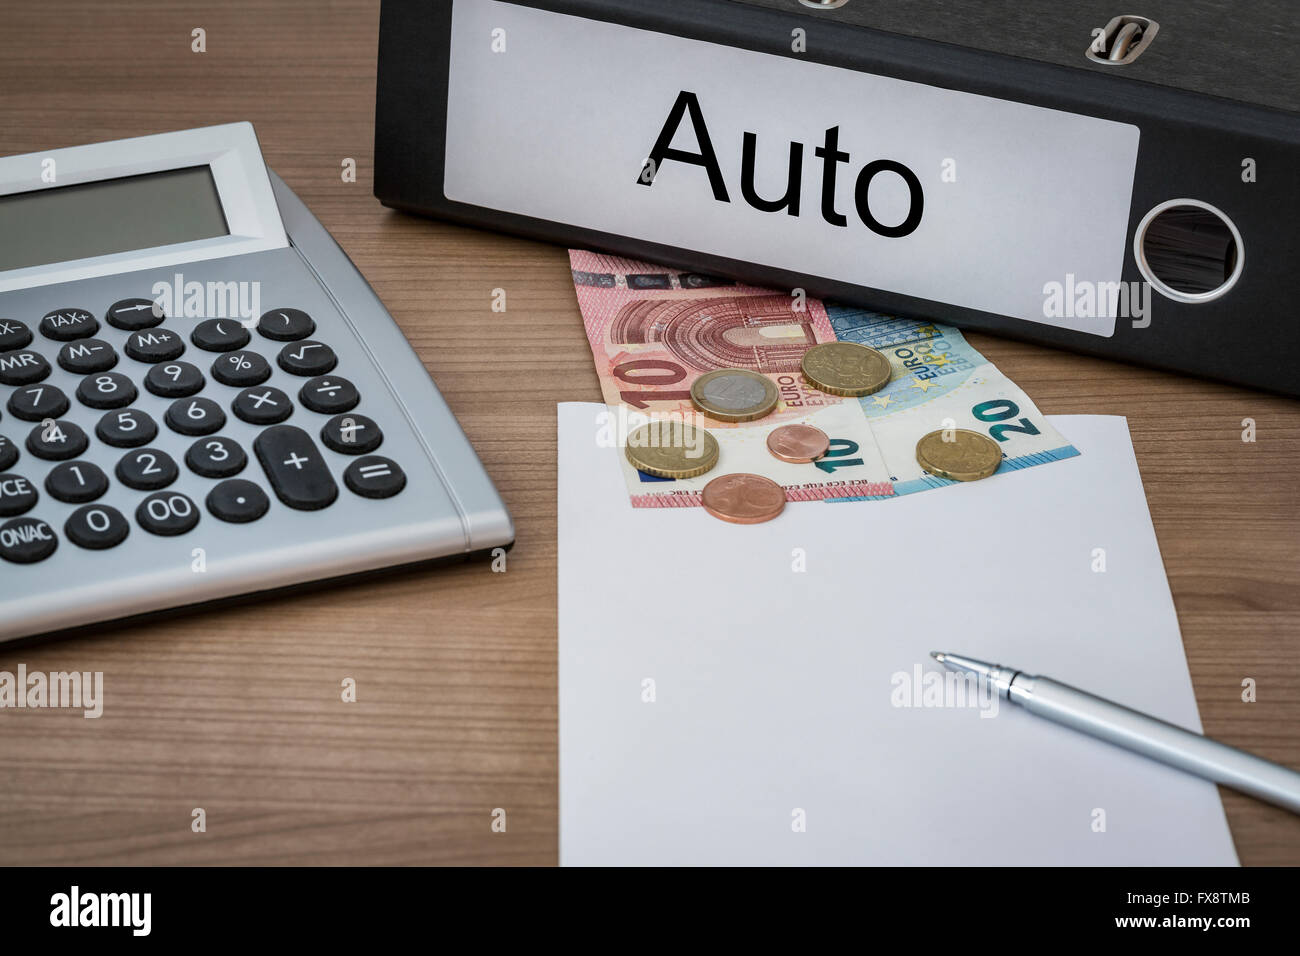 Auto (german Car) written on a binder on a desk with euro money calculator blank sheet and pen Stock Photo